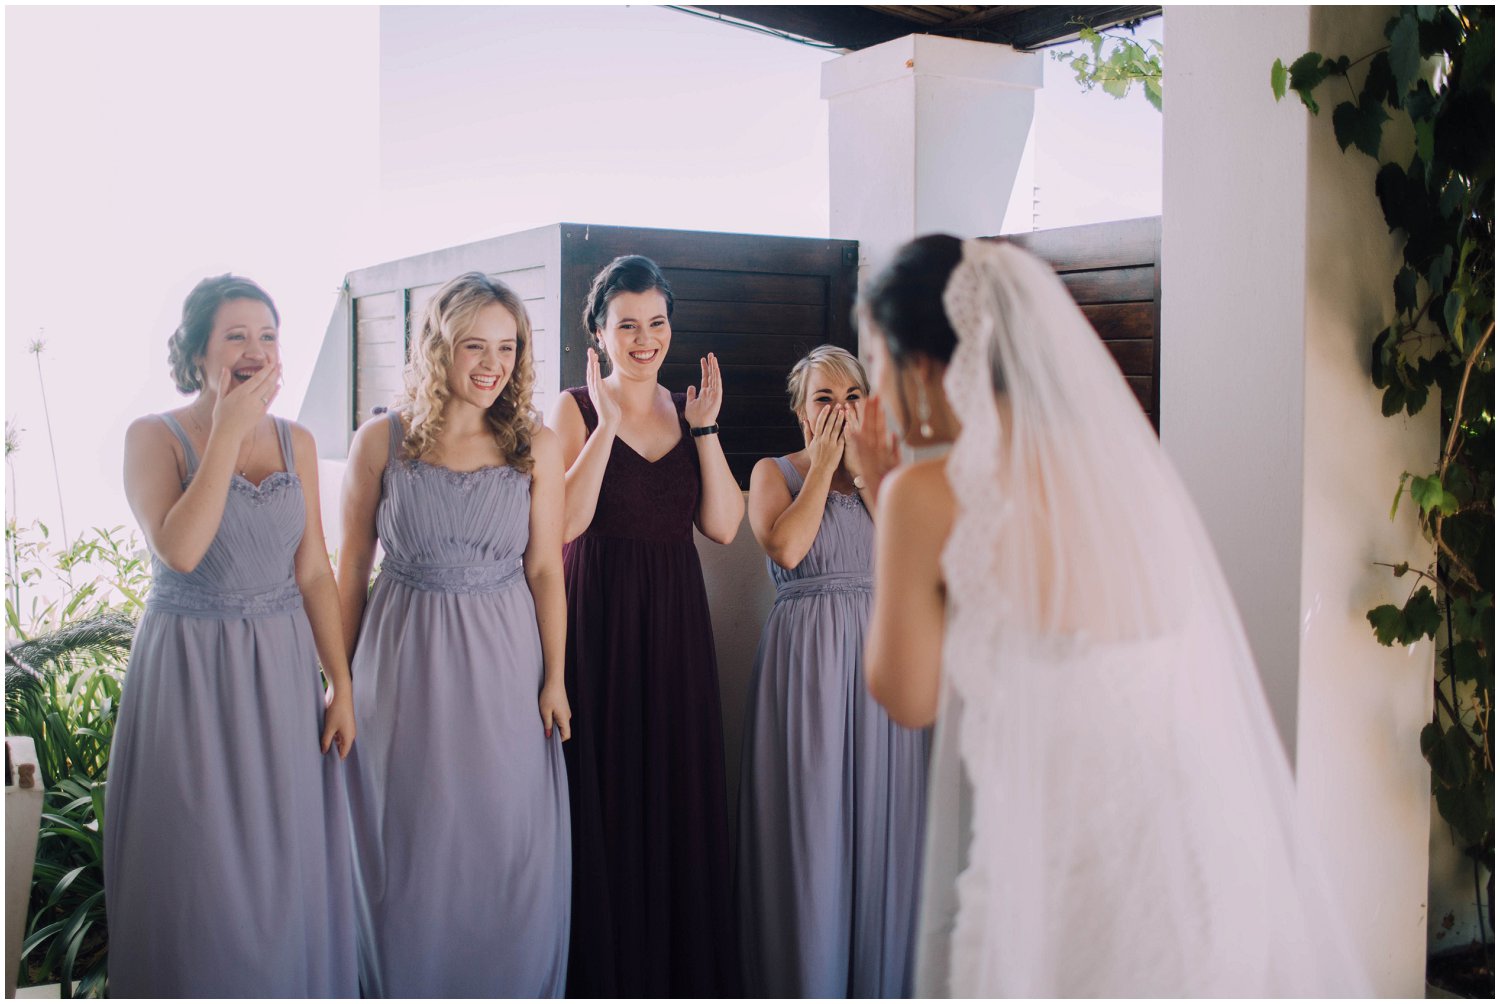 Top Artistic Creative Documentary Wedding Photographer Cape Town South Africa Rue Kruger_0243.jpg